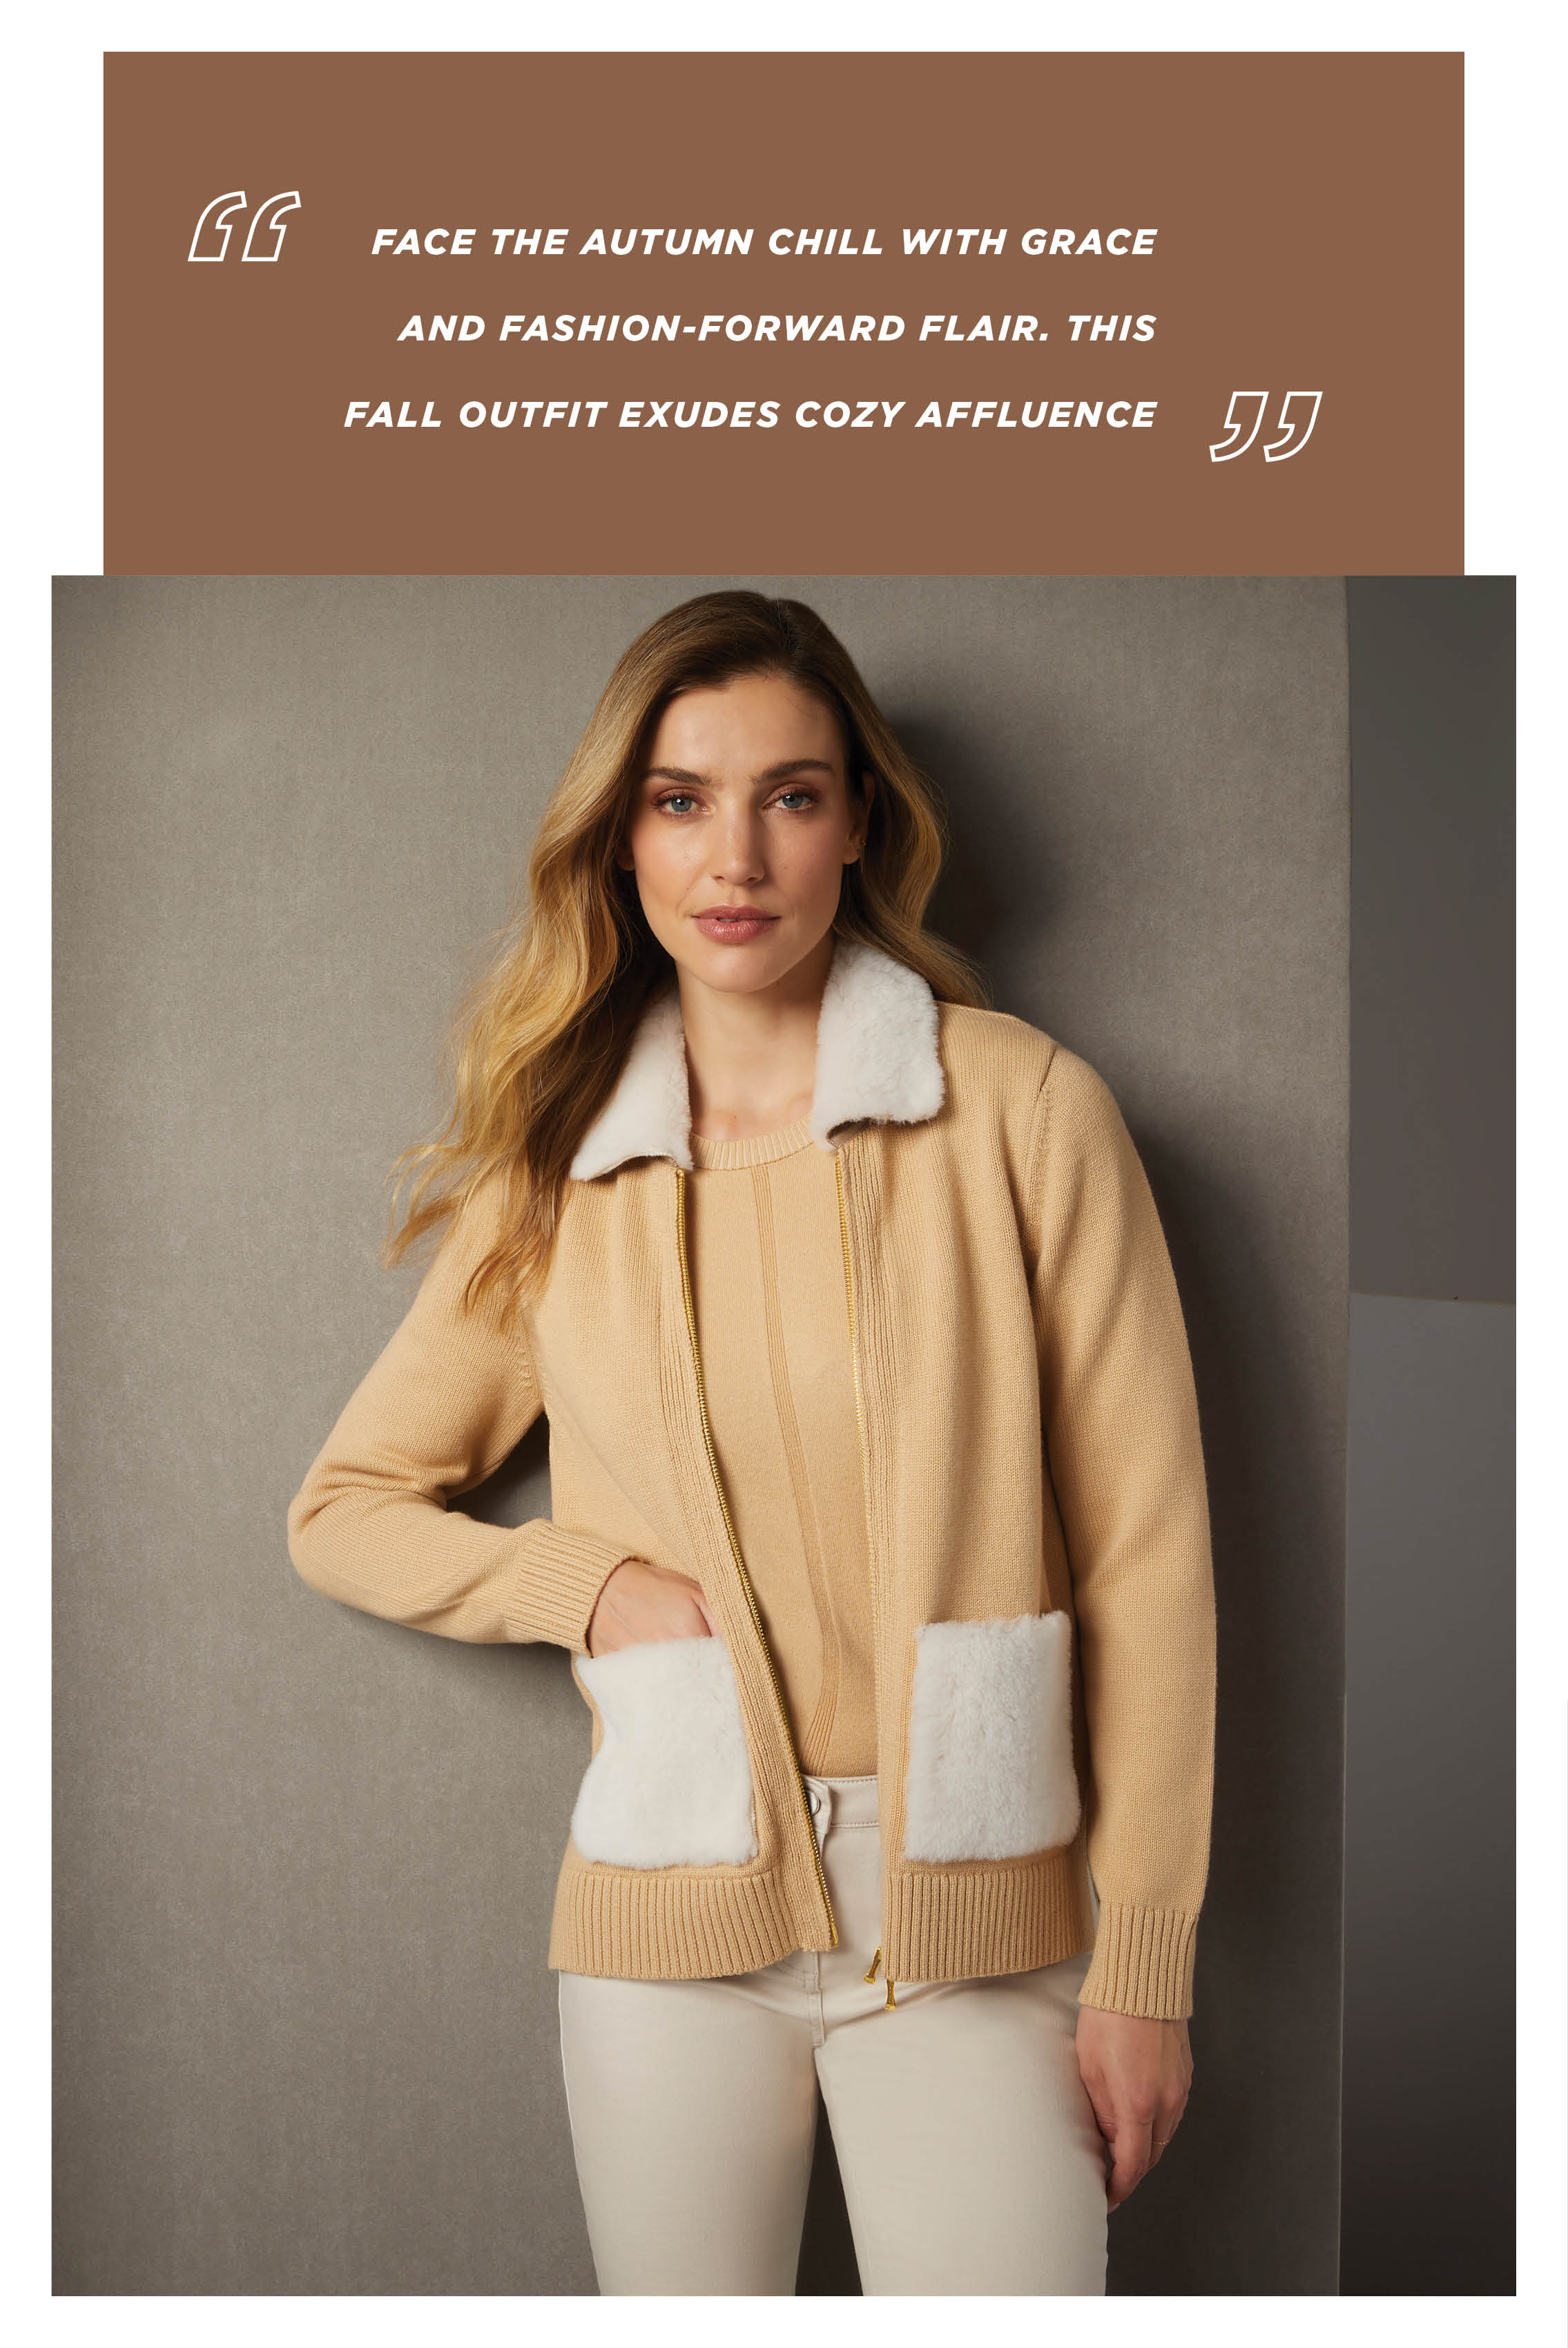 This fall outfit exudes cozy affluence with its merino wool cardigan and ribbed knit shell, elevated with pockets and a collar in ivory lamb fur shearling. The soft texture and warm tones create a perfect blend of comfort and style...